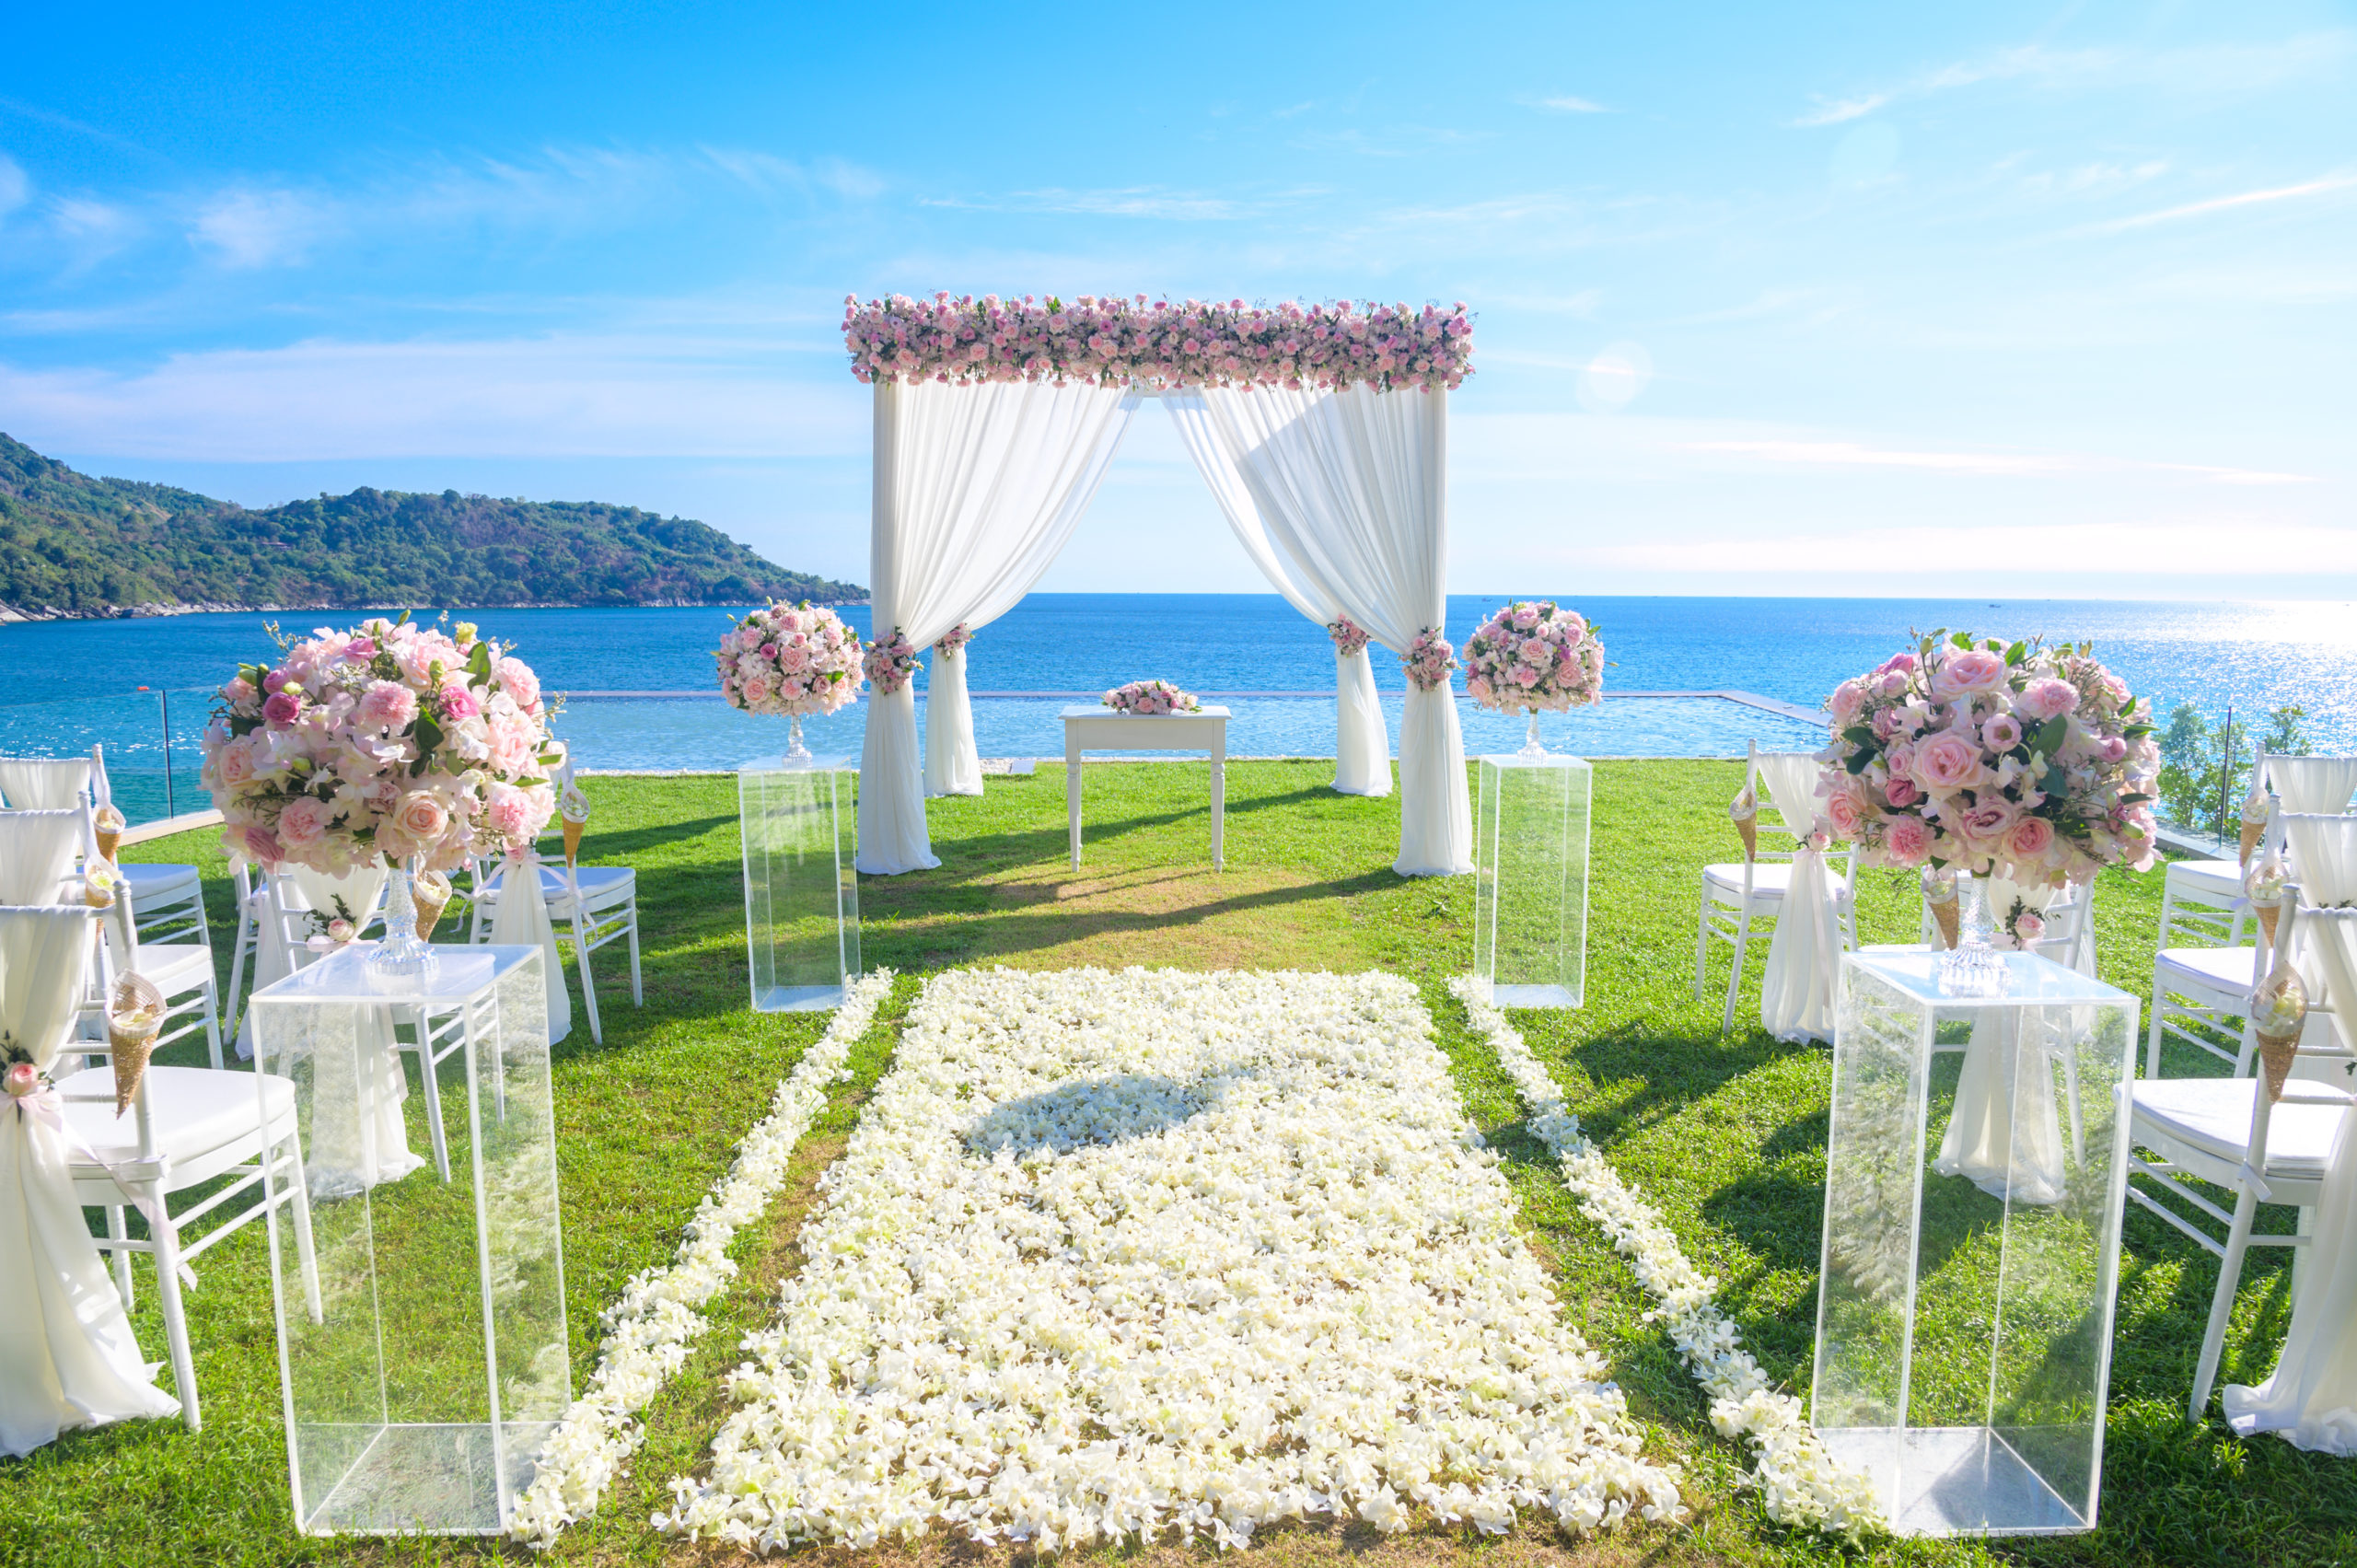 Wedding Ceremony. Arch, Decorated With Flowers On The Lawn, Beach Background, Sea In Summer.